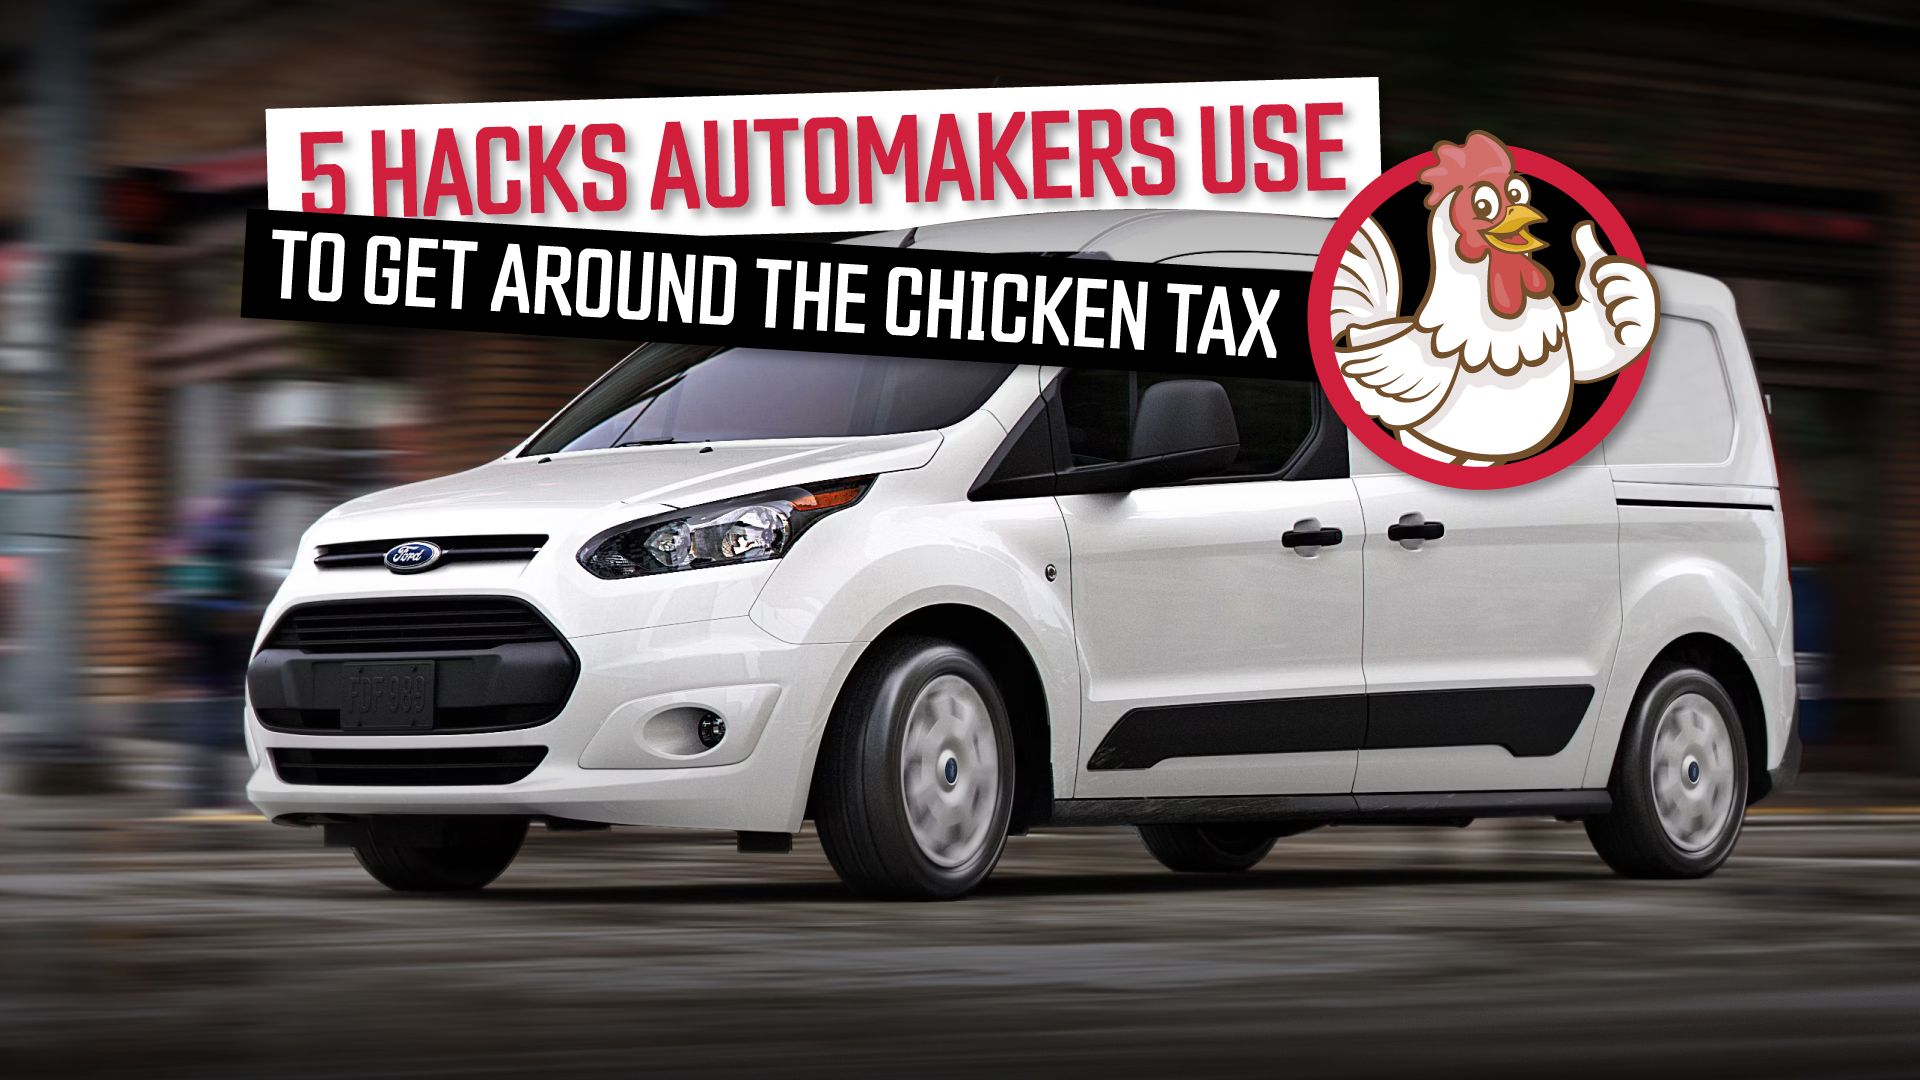 5-Hacks-Automakers-Use-To-Get-Around-The-Chicken-Tax